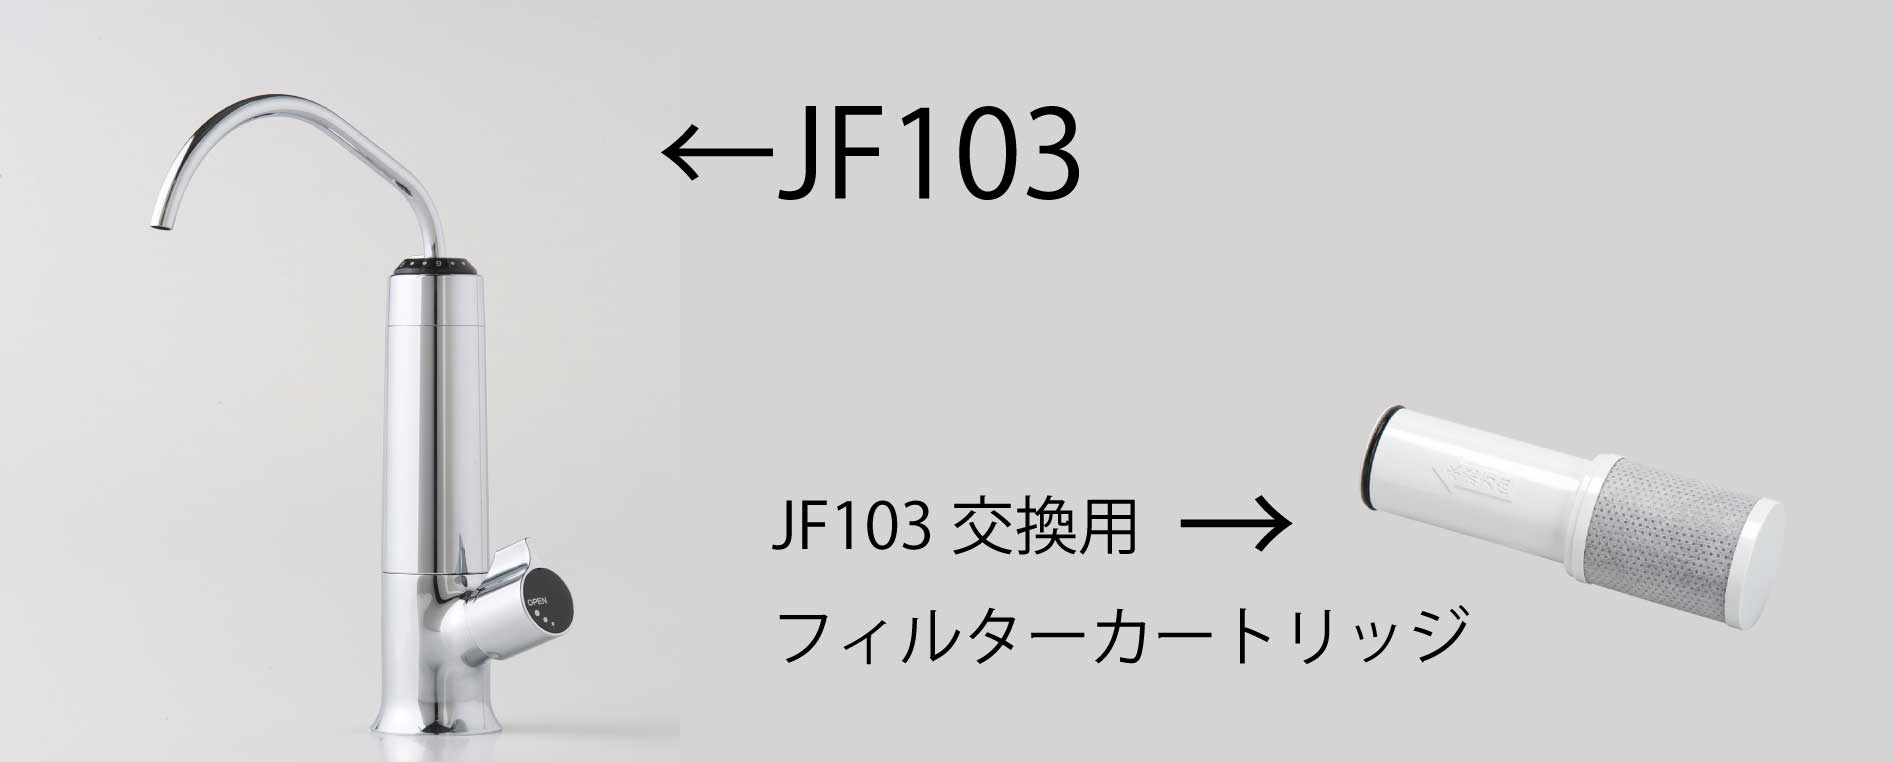 JF103